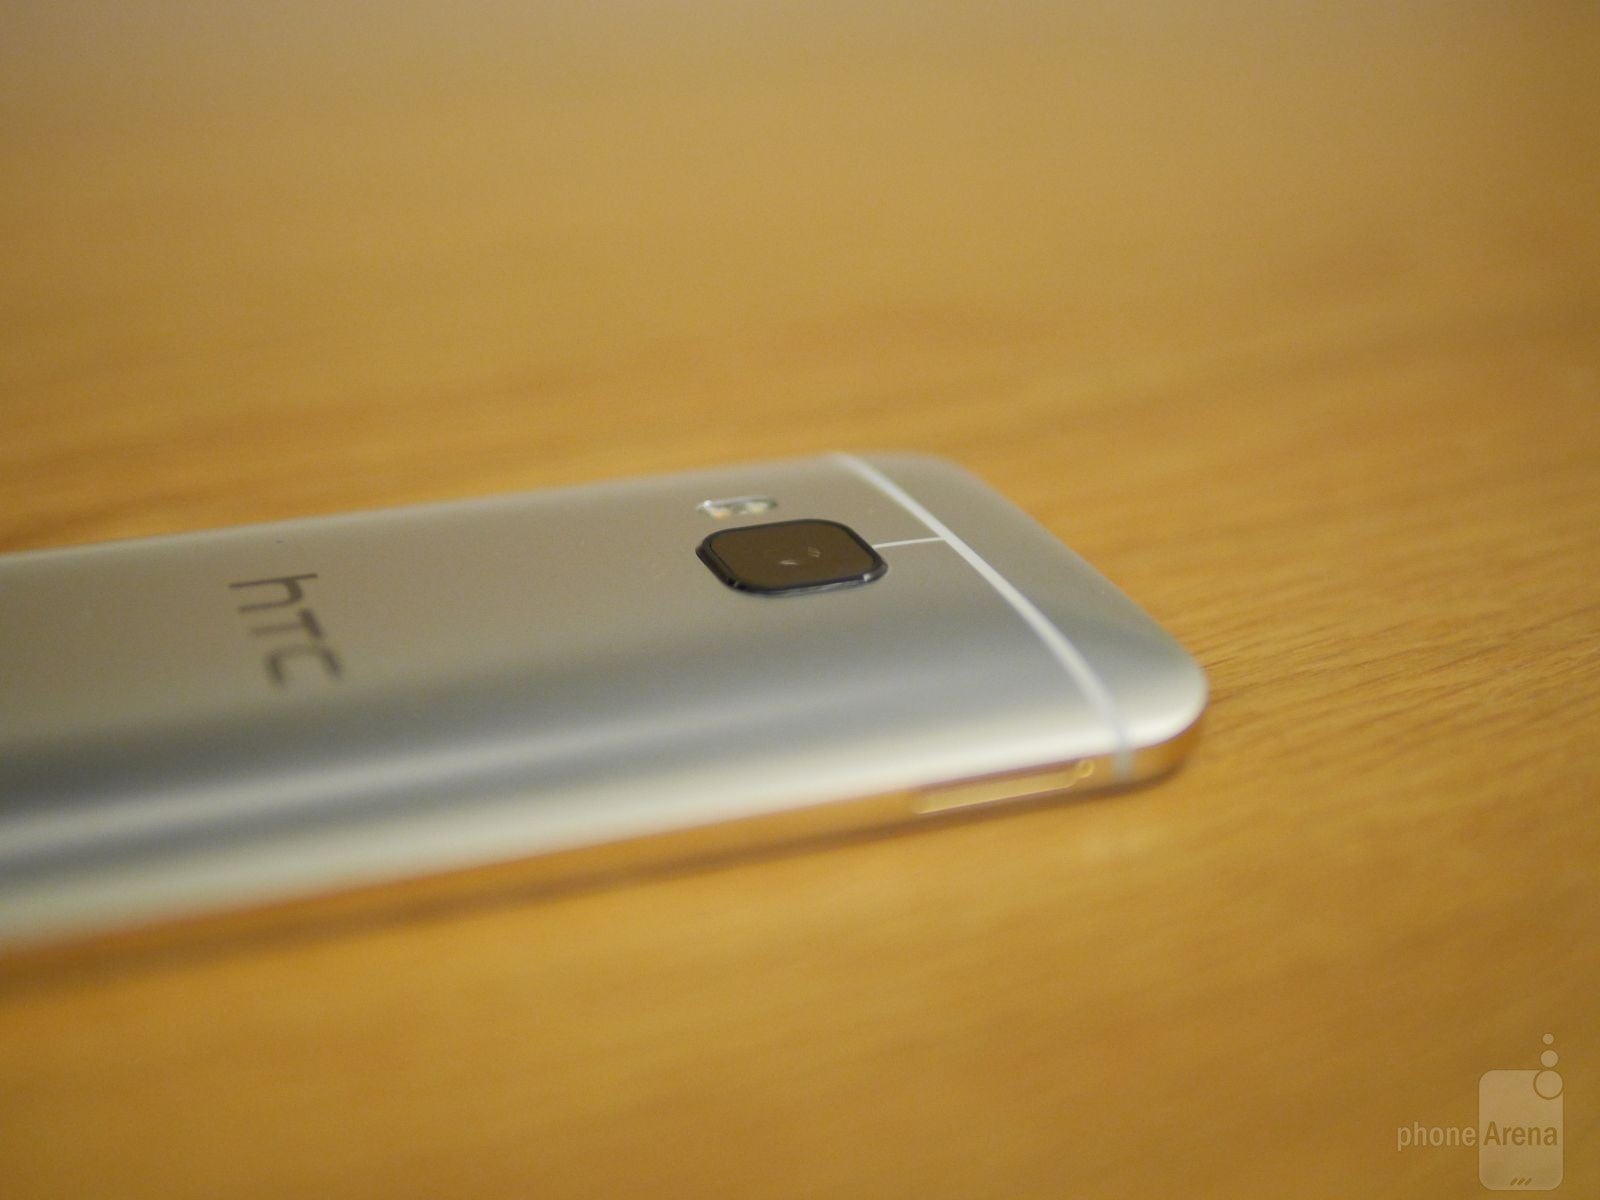 HTC One M9 hands-on